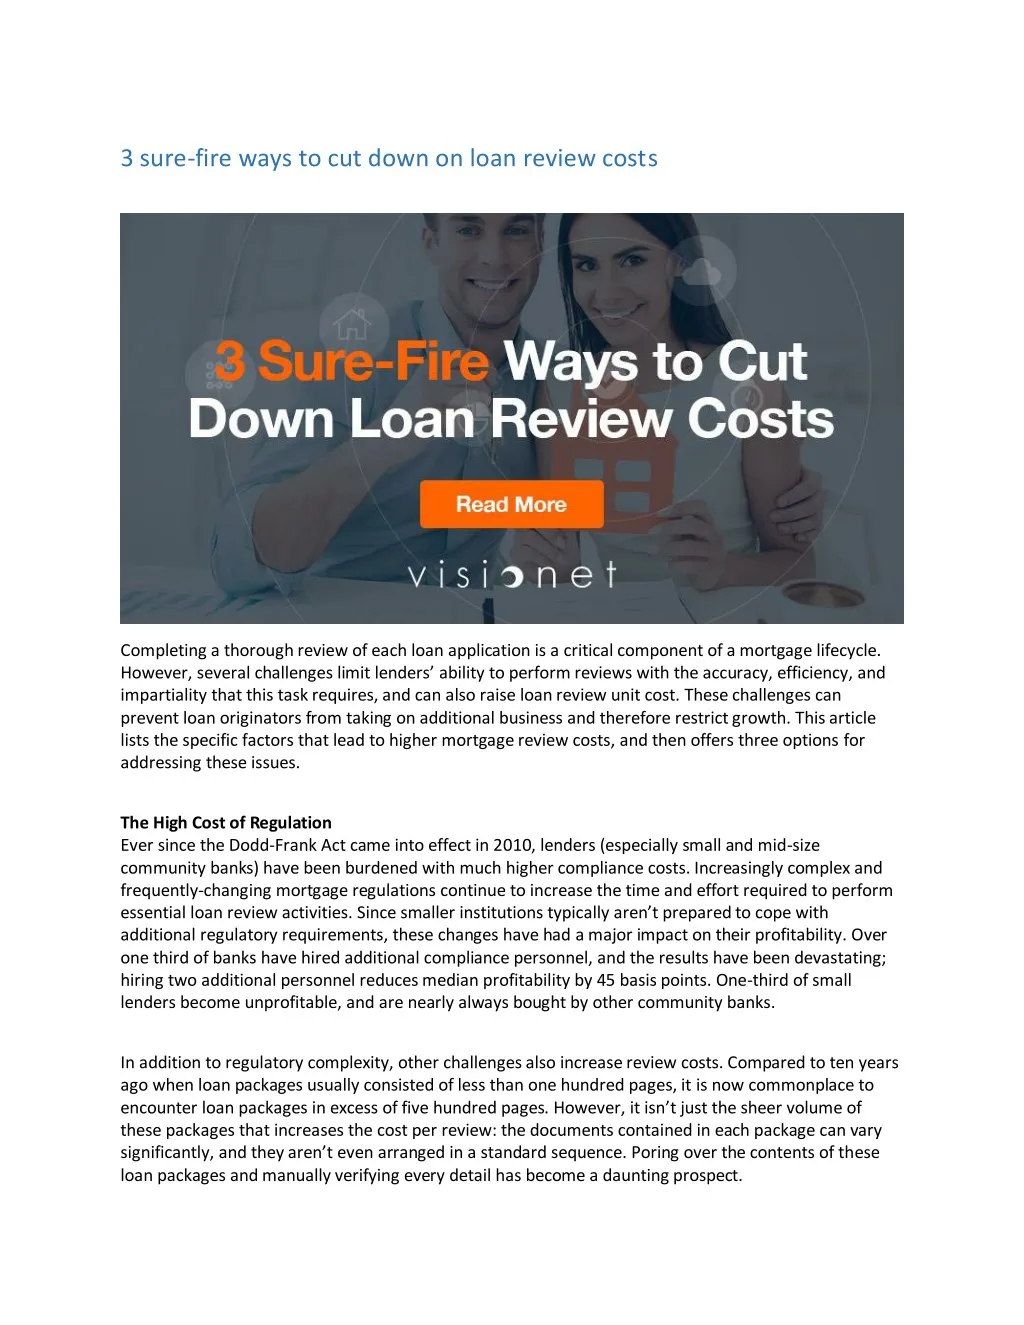 3 sure fire ways to cut down on loan review costs